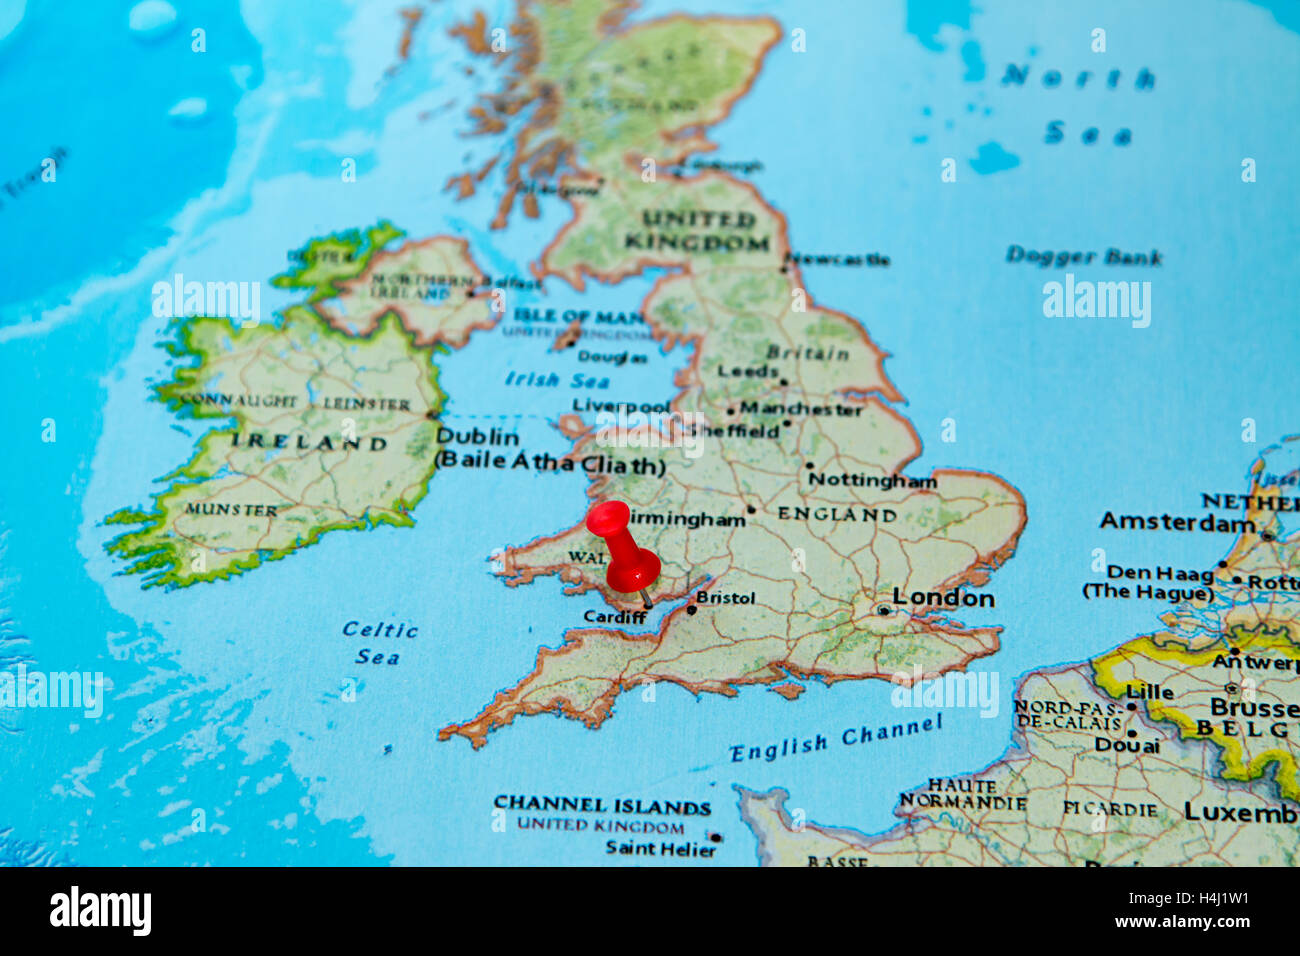 Cardiff, U.K. pinned on a map of Europe. Stock Photo